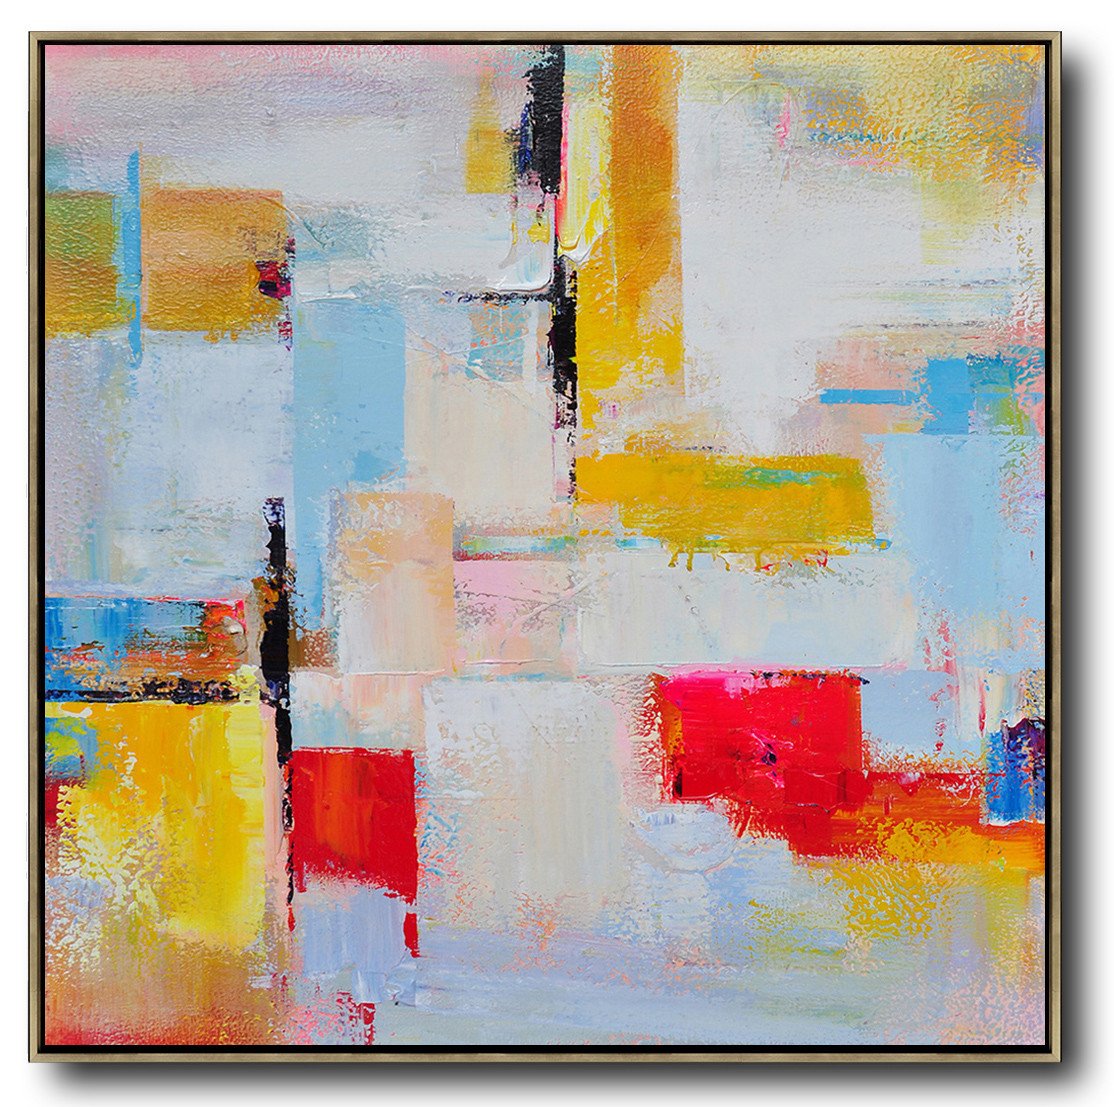 Hand-painted oversized Palette Knife Painting Contemporary Art on canvas, large square canvas art - Contemporary Art Daily Large